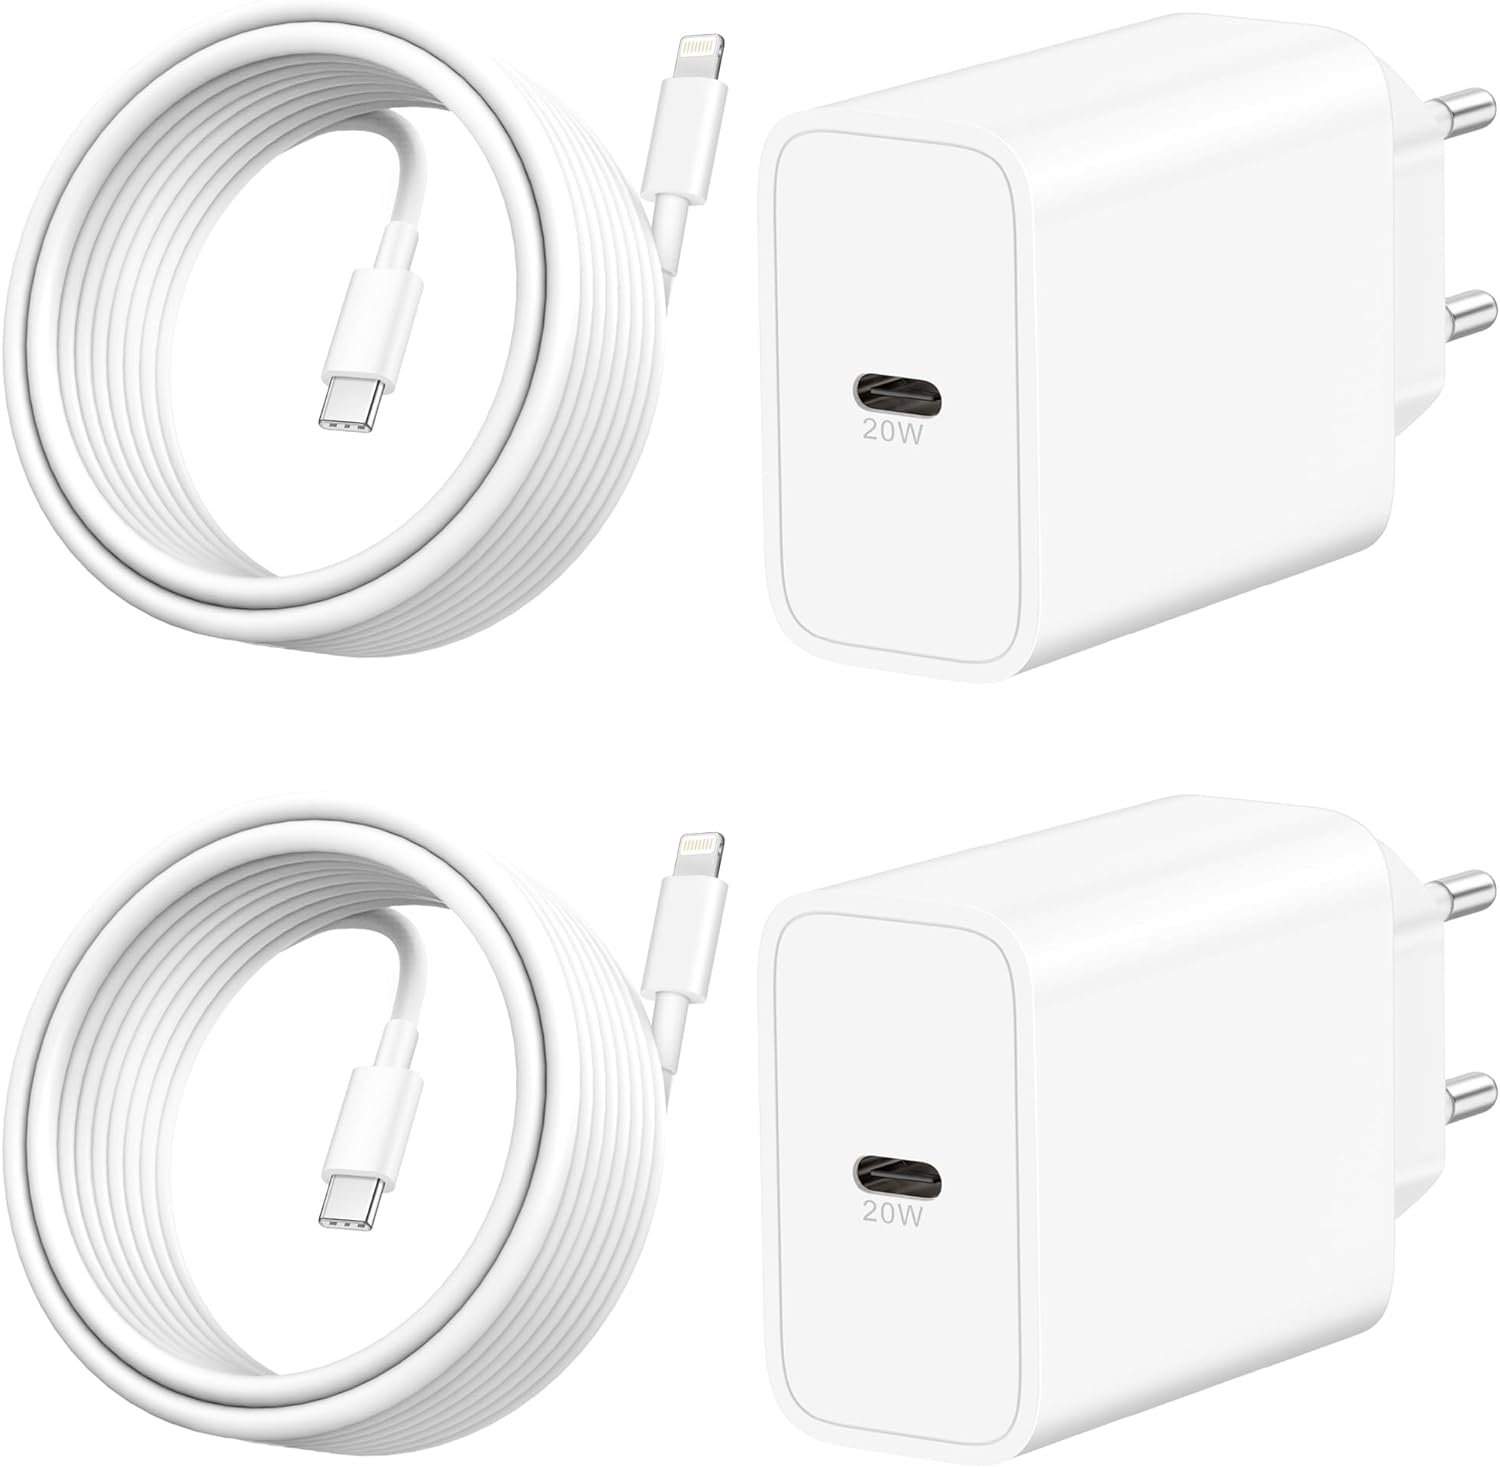 iPhone Charger iPad Charger [Apple MFi Certified], European Travel Plug Adapter, 2-Pack 20W US to Europe EU USB C Fast Charger Wall Charger Block with 10FT Lightning Cable for iPhone, iPad, AirPods